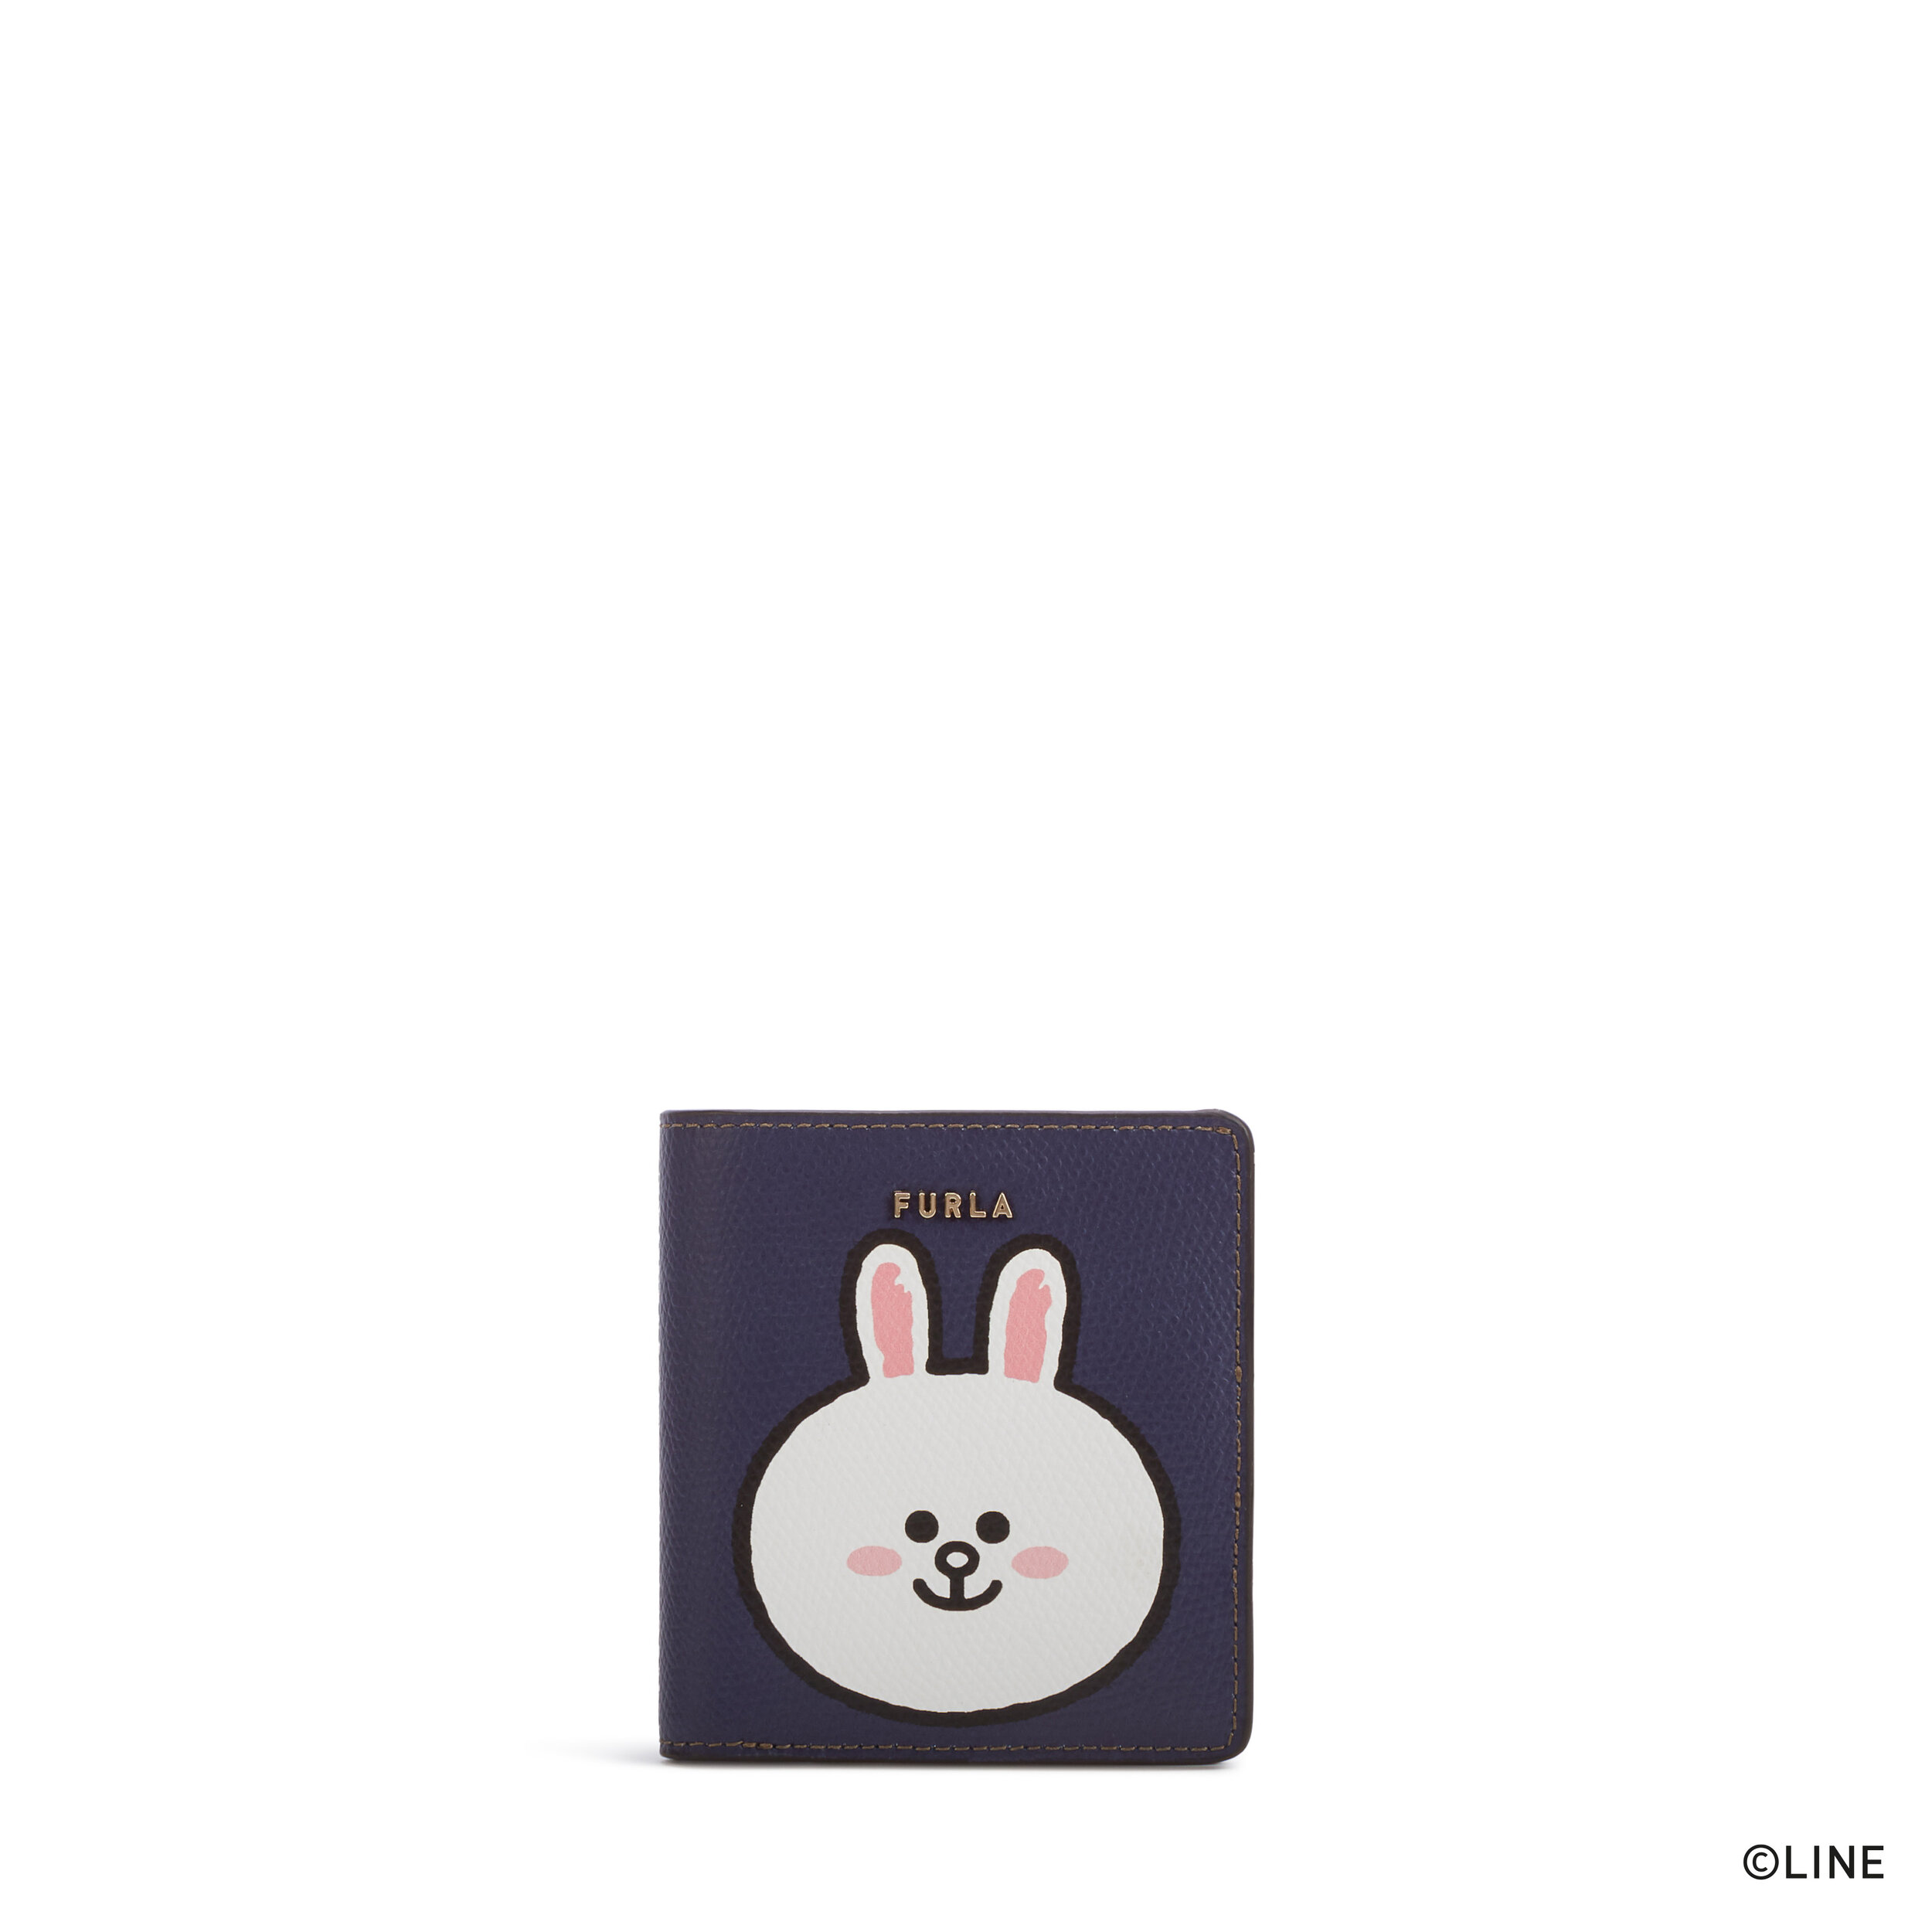 FURLA LINE FRIENDS S COMPACT WALLET_CONY PRINT ON ARES TEXTURED LEATHER_LF-copyright.jpg